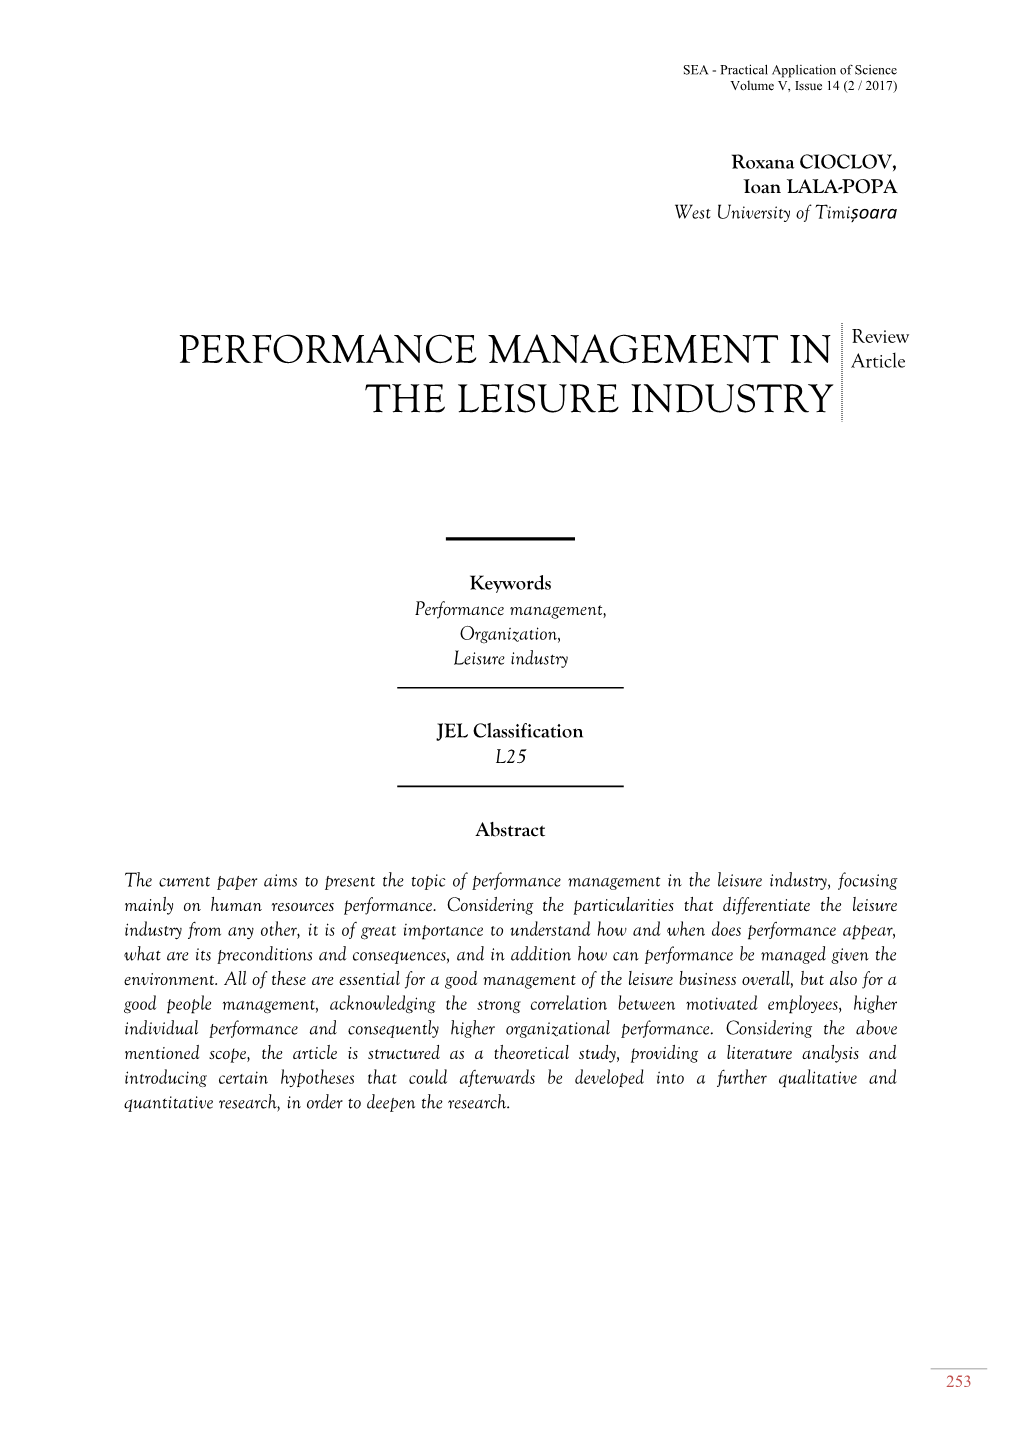 Performance Management in the Leisure Industry, Focusing Mainly on Human Resources Performance